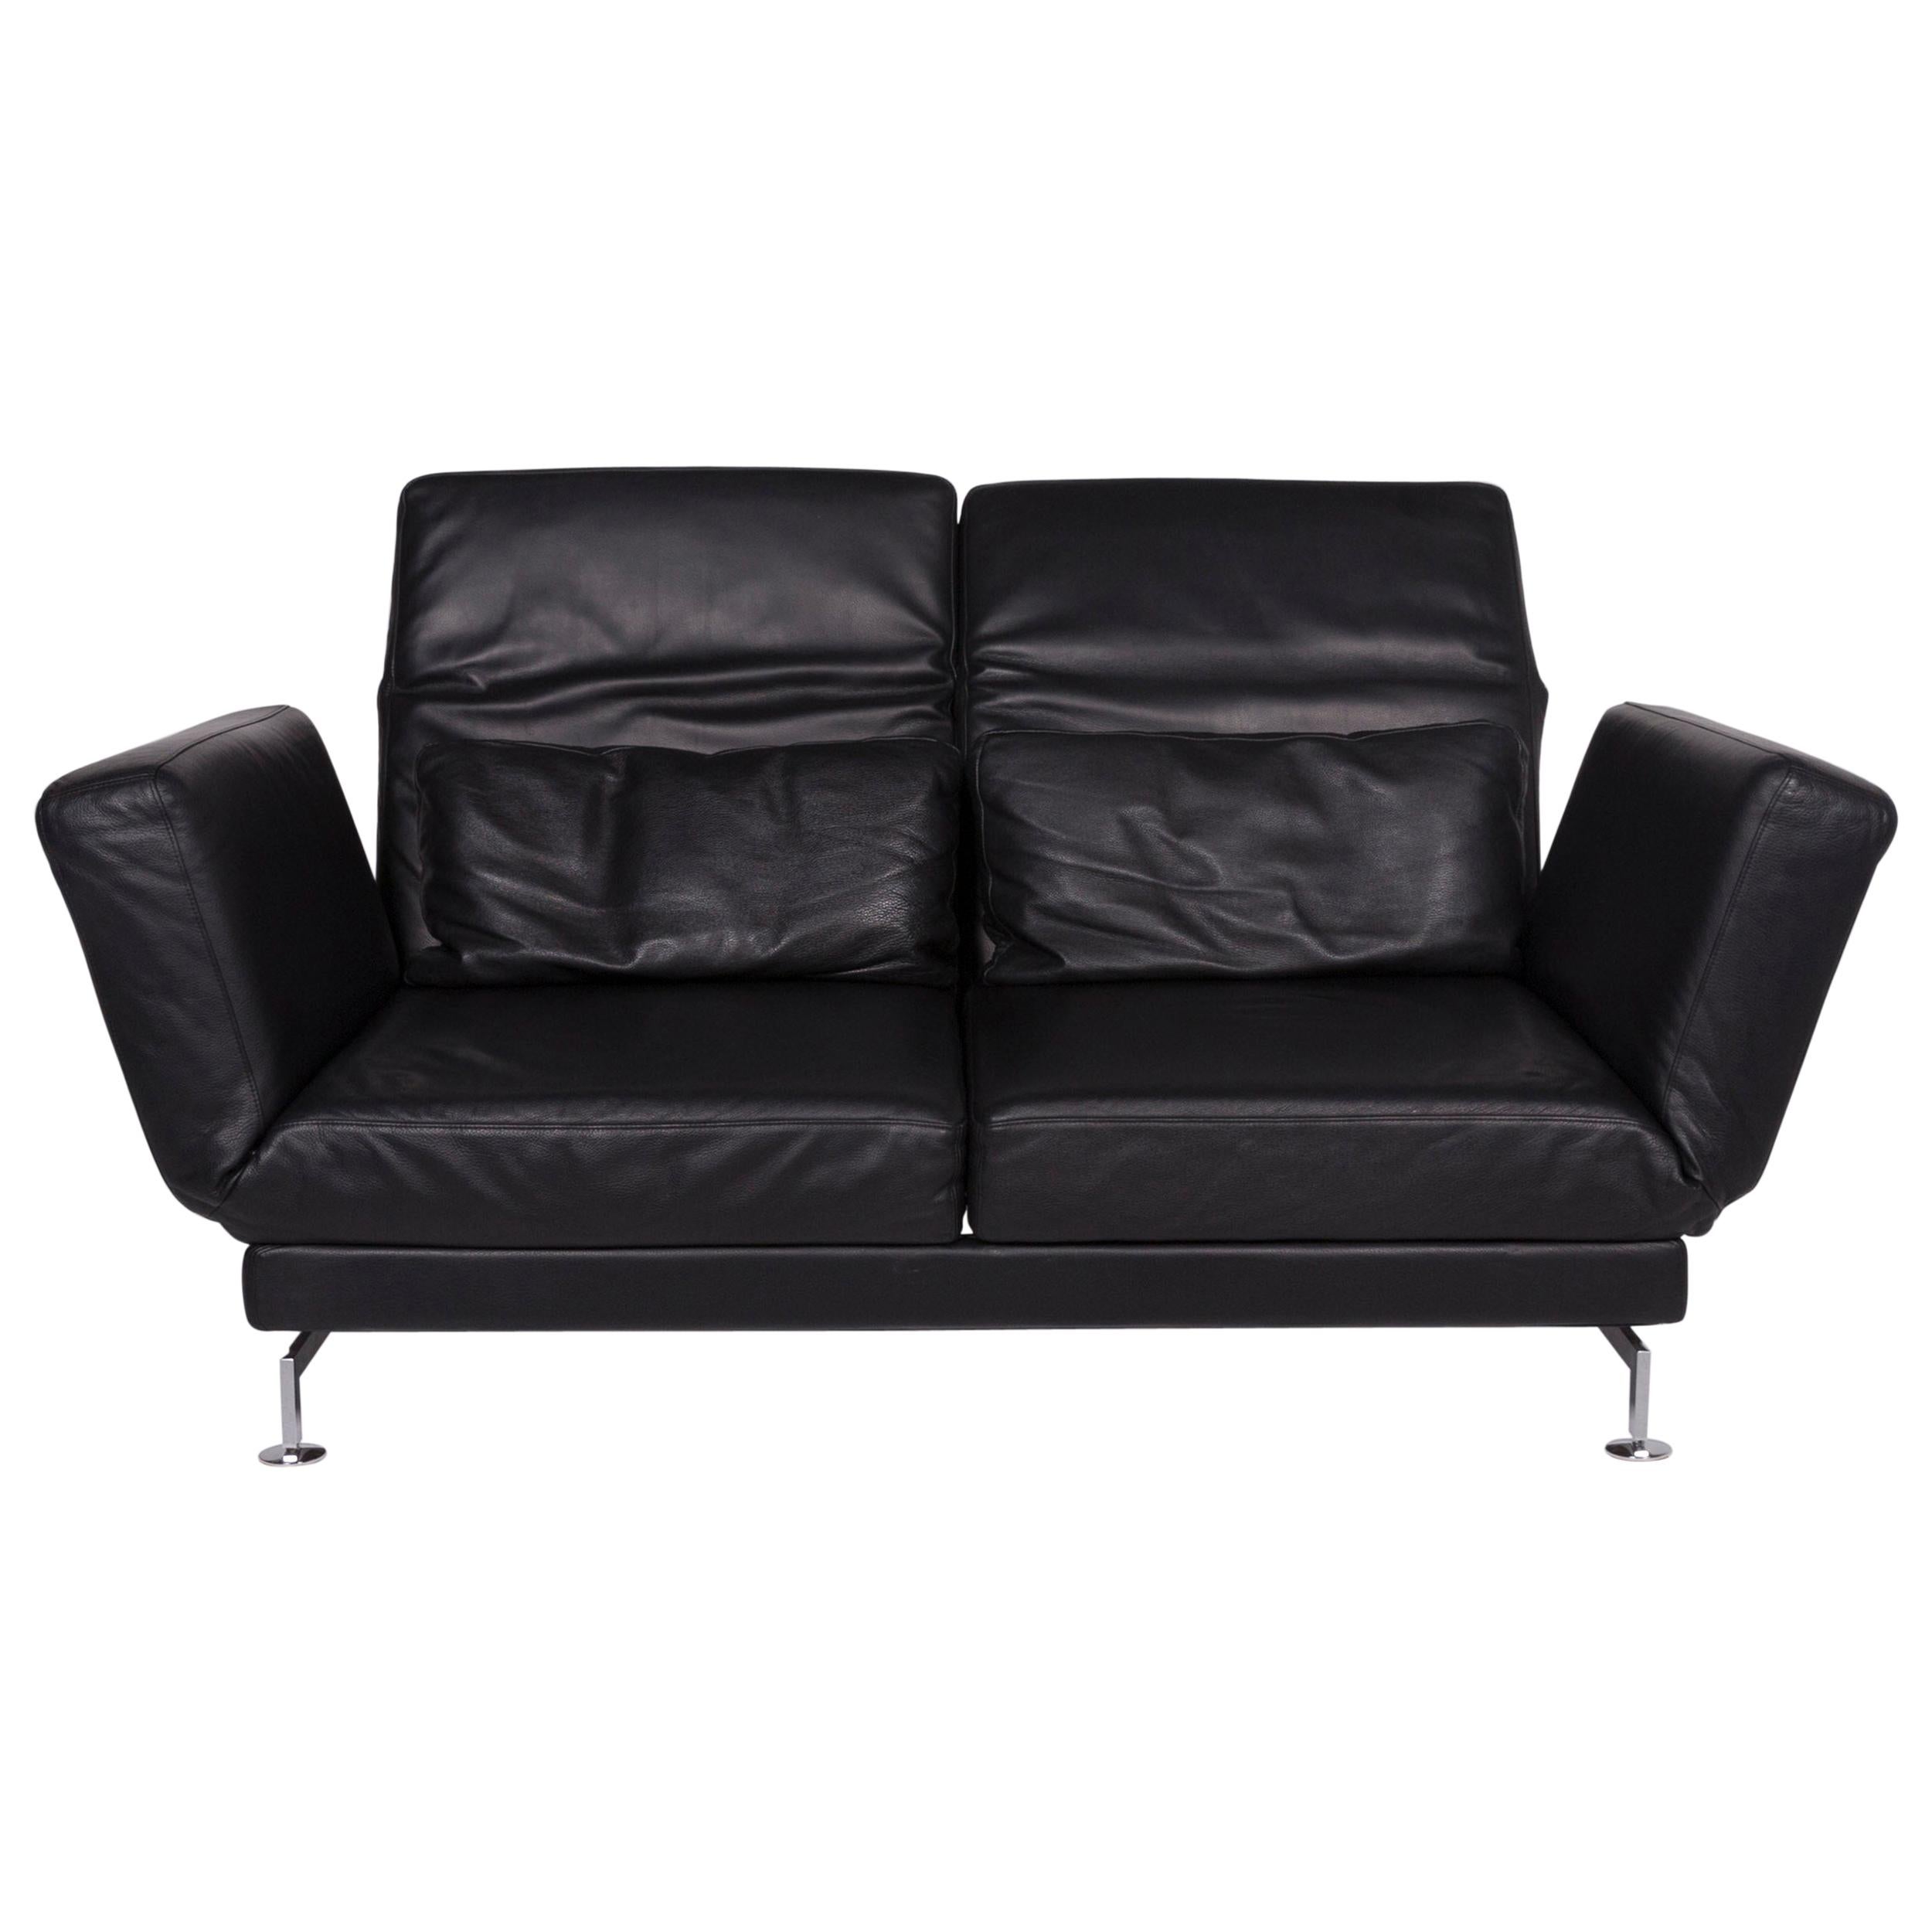 Brühl & Sippold Moule Leather Sofa Black Two-Seat